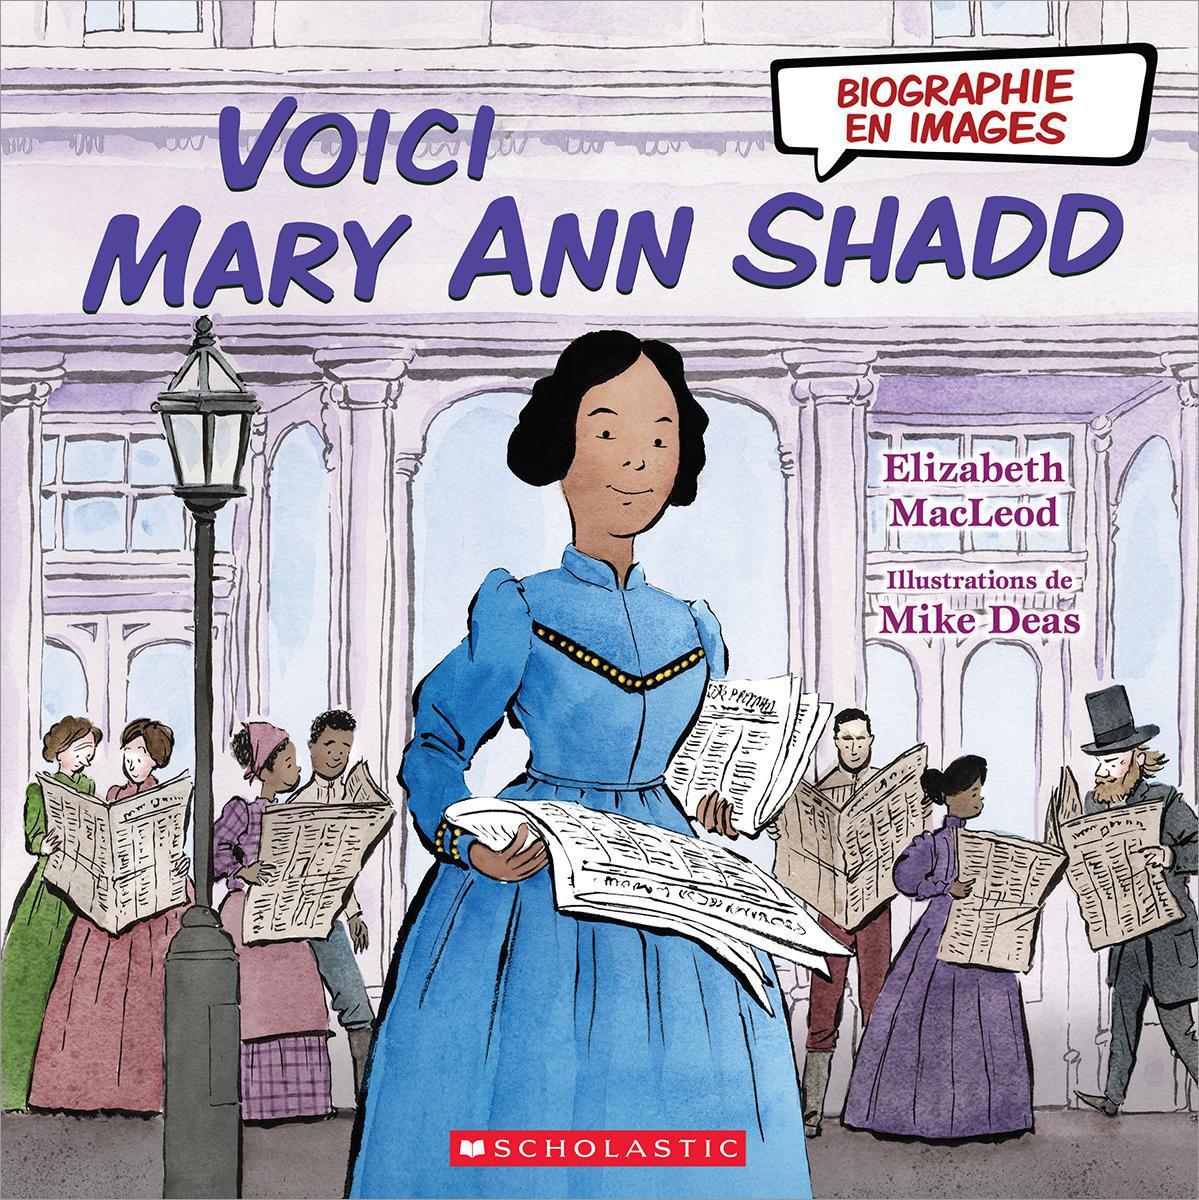  Biographie en images : Voici Mary Ann Shadd 